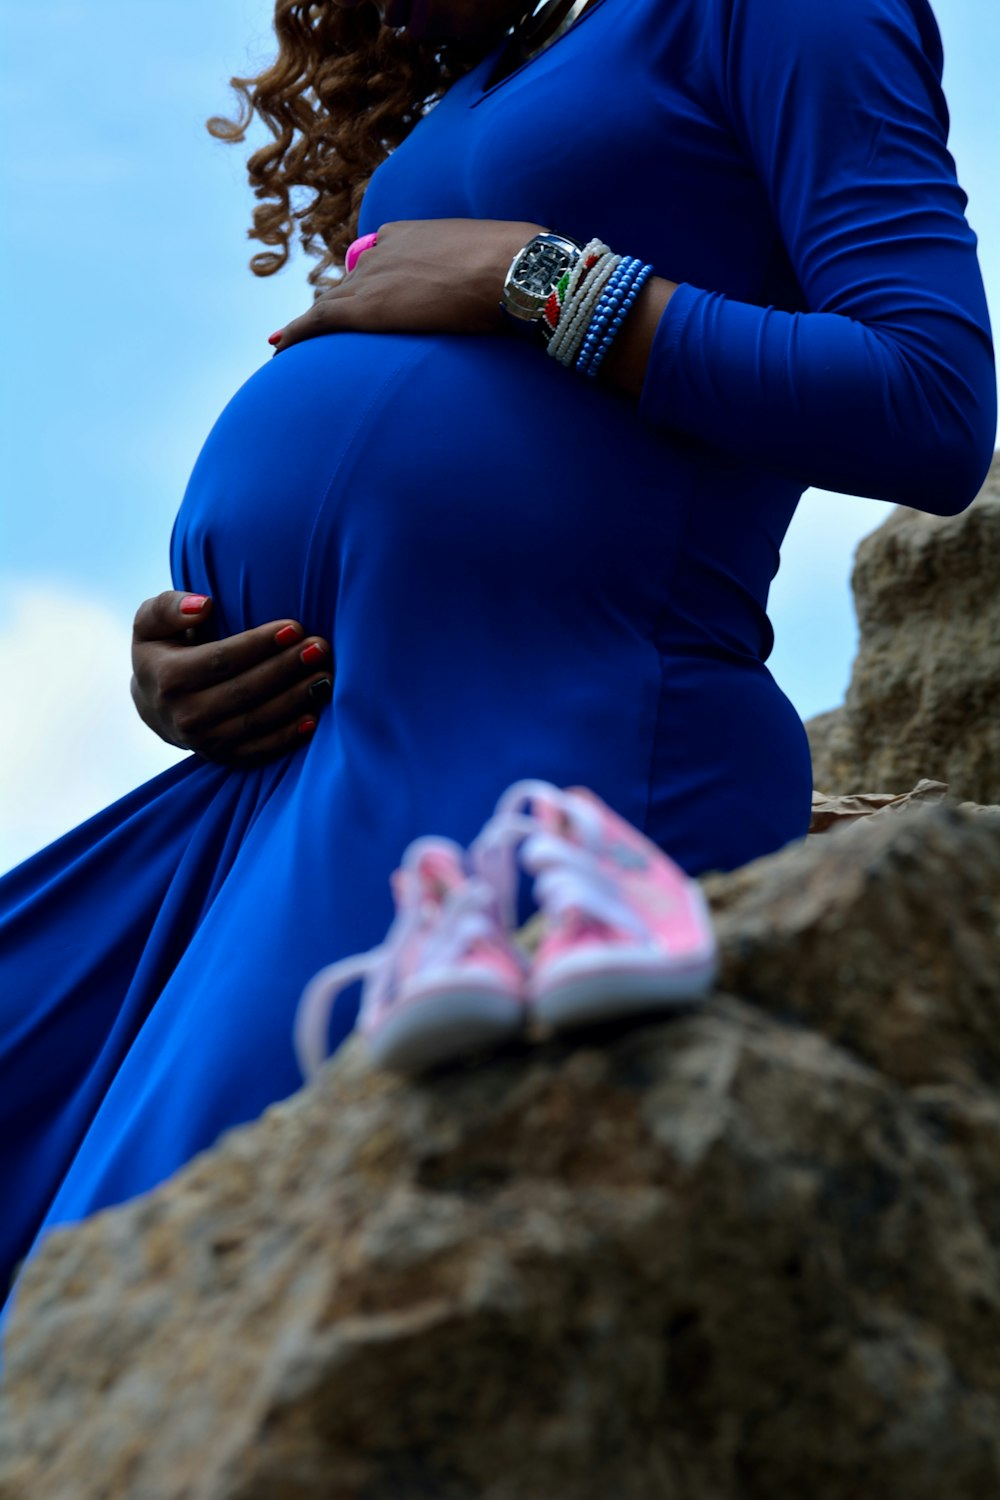 A pregnant woman's belly in a blue maternity dress.